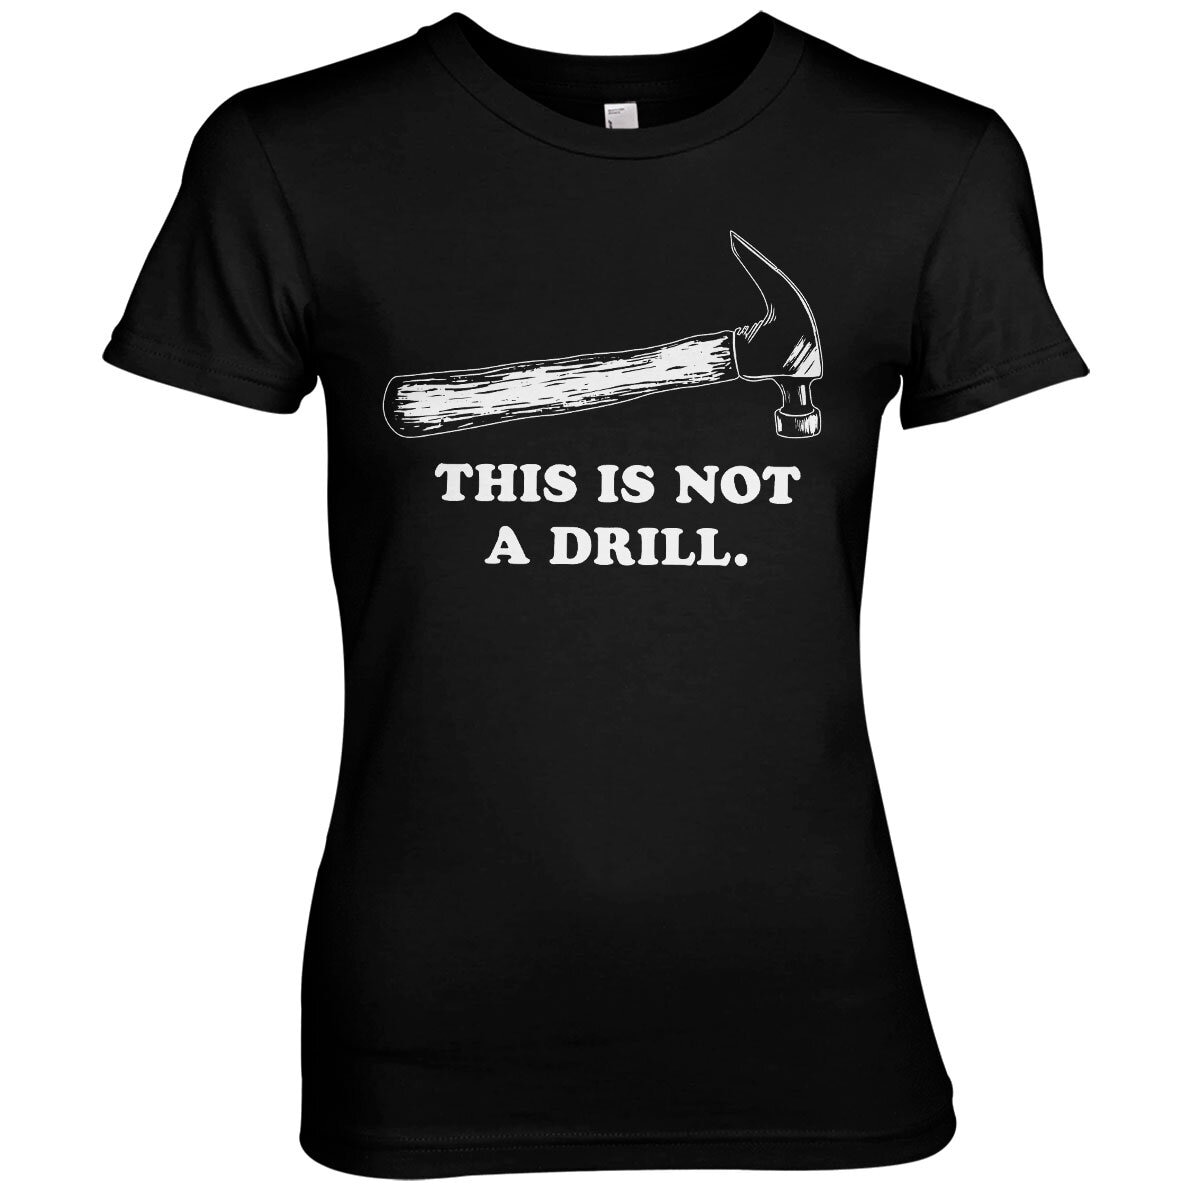 This Is Not A Drill Girly Tee